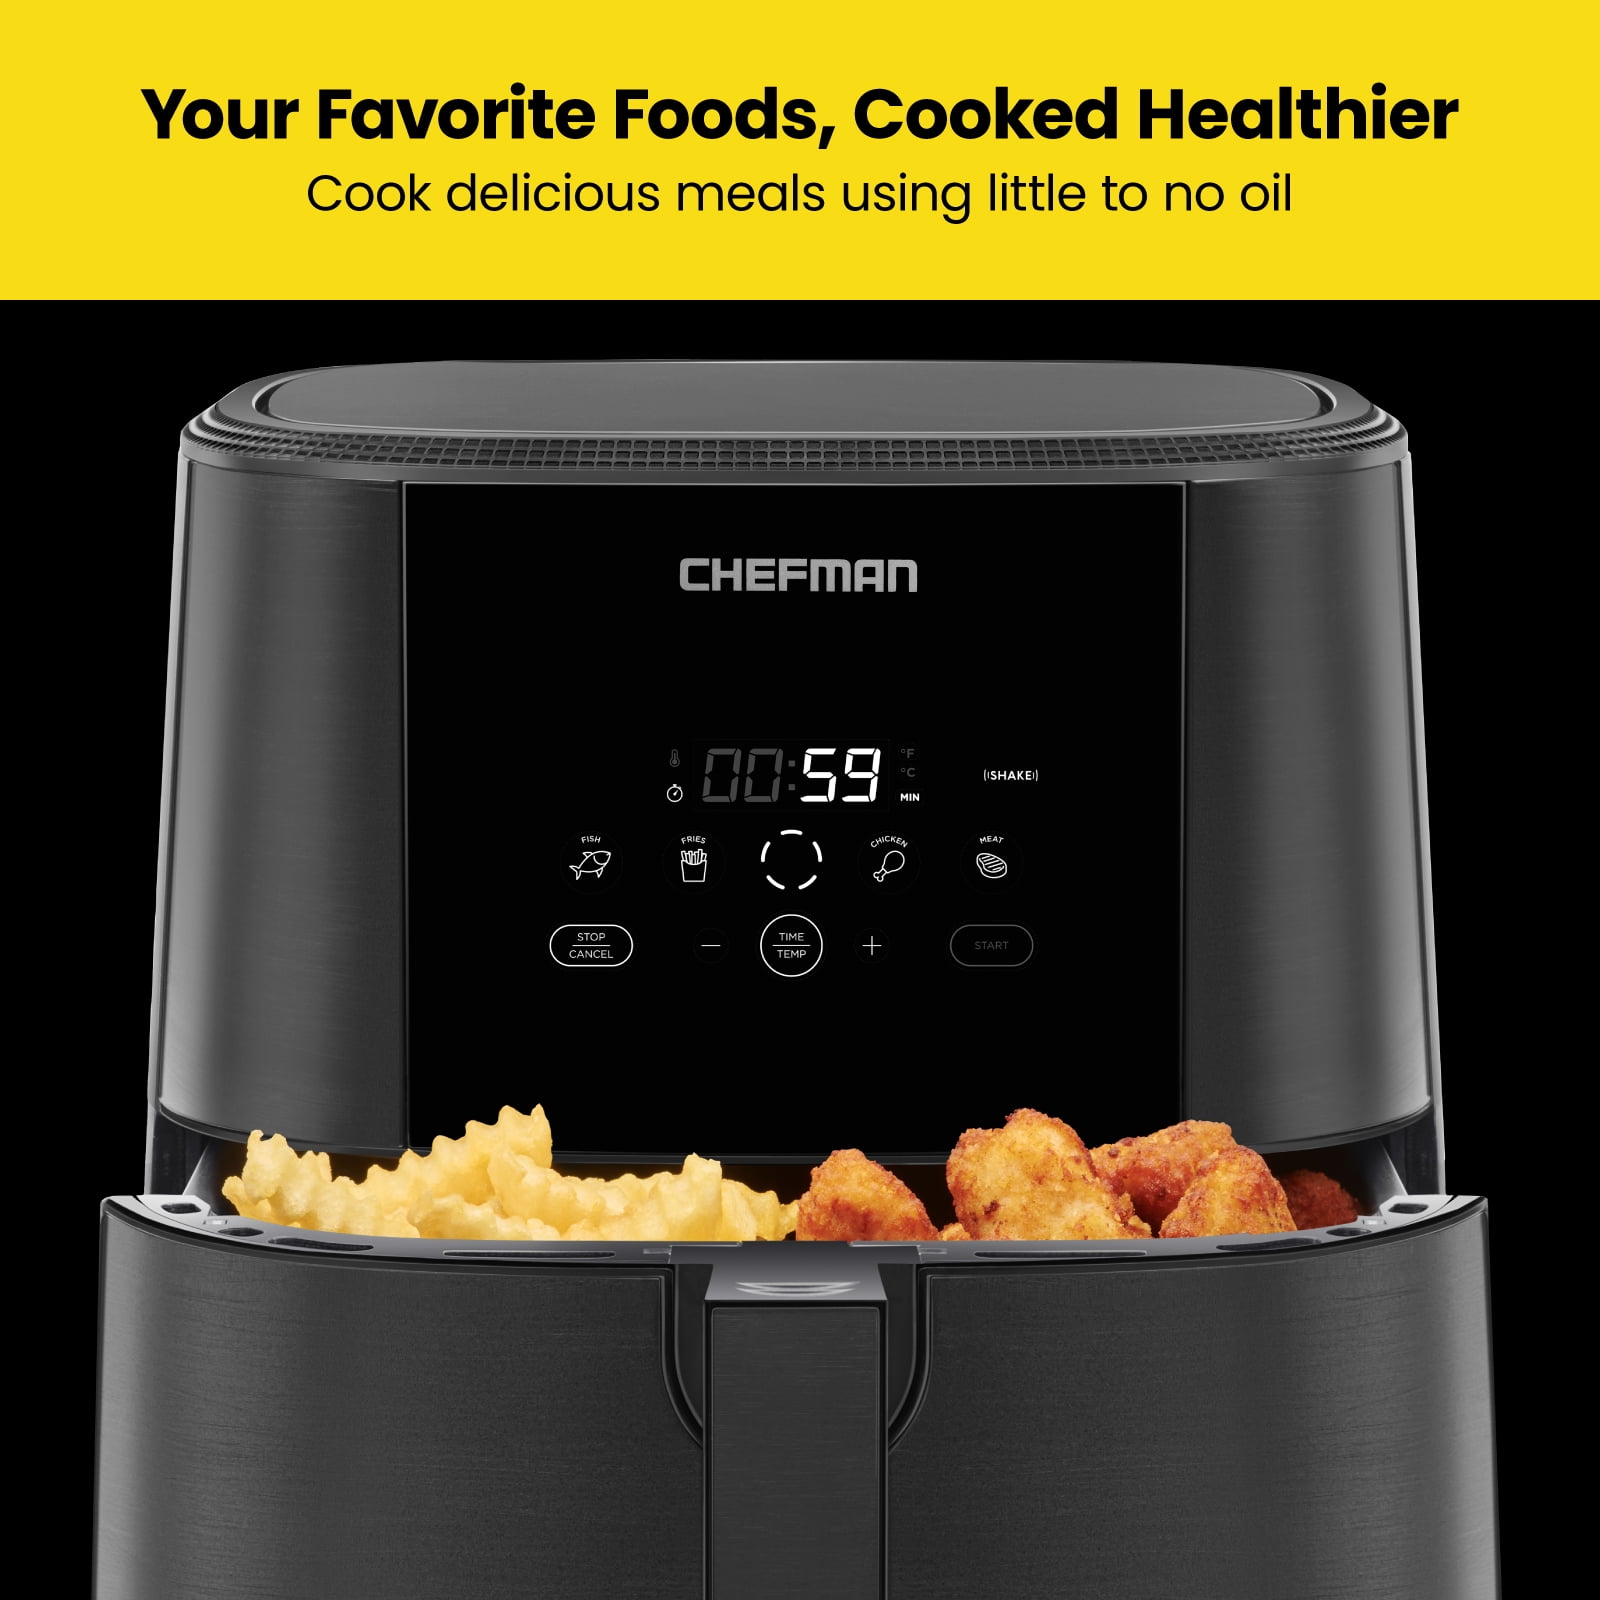  CHEFMAN 2 in 1 Max XL 8 Qt Air Fryer, Healthy Cooking, User  Friendly, Basket Divider For Dual Cooking, Nonstick Stainless Steel,  Digital Touch Screen with 4 Cooking Functions, BPA-Free 